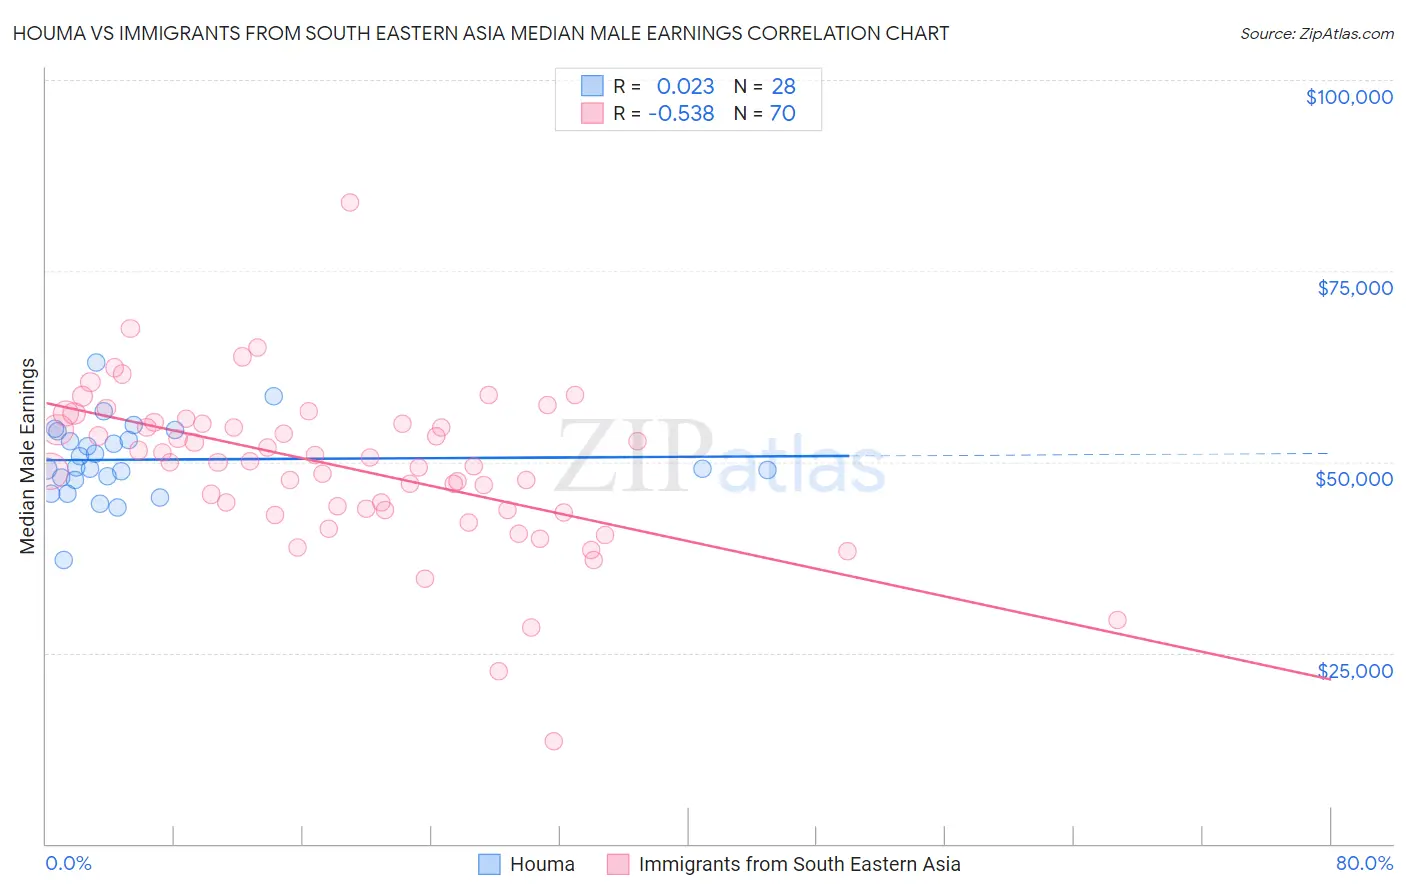 Houma vs Immigrants from South Eastern Asia Median Male Earnings